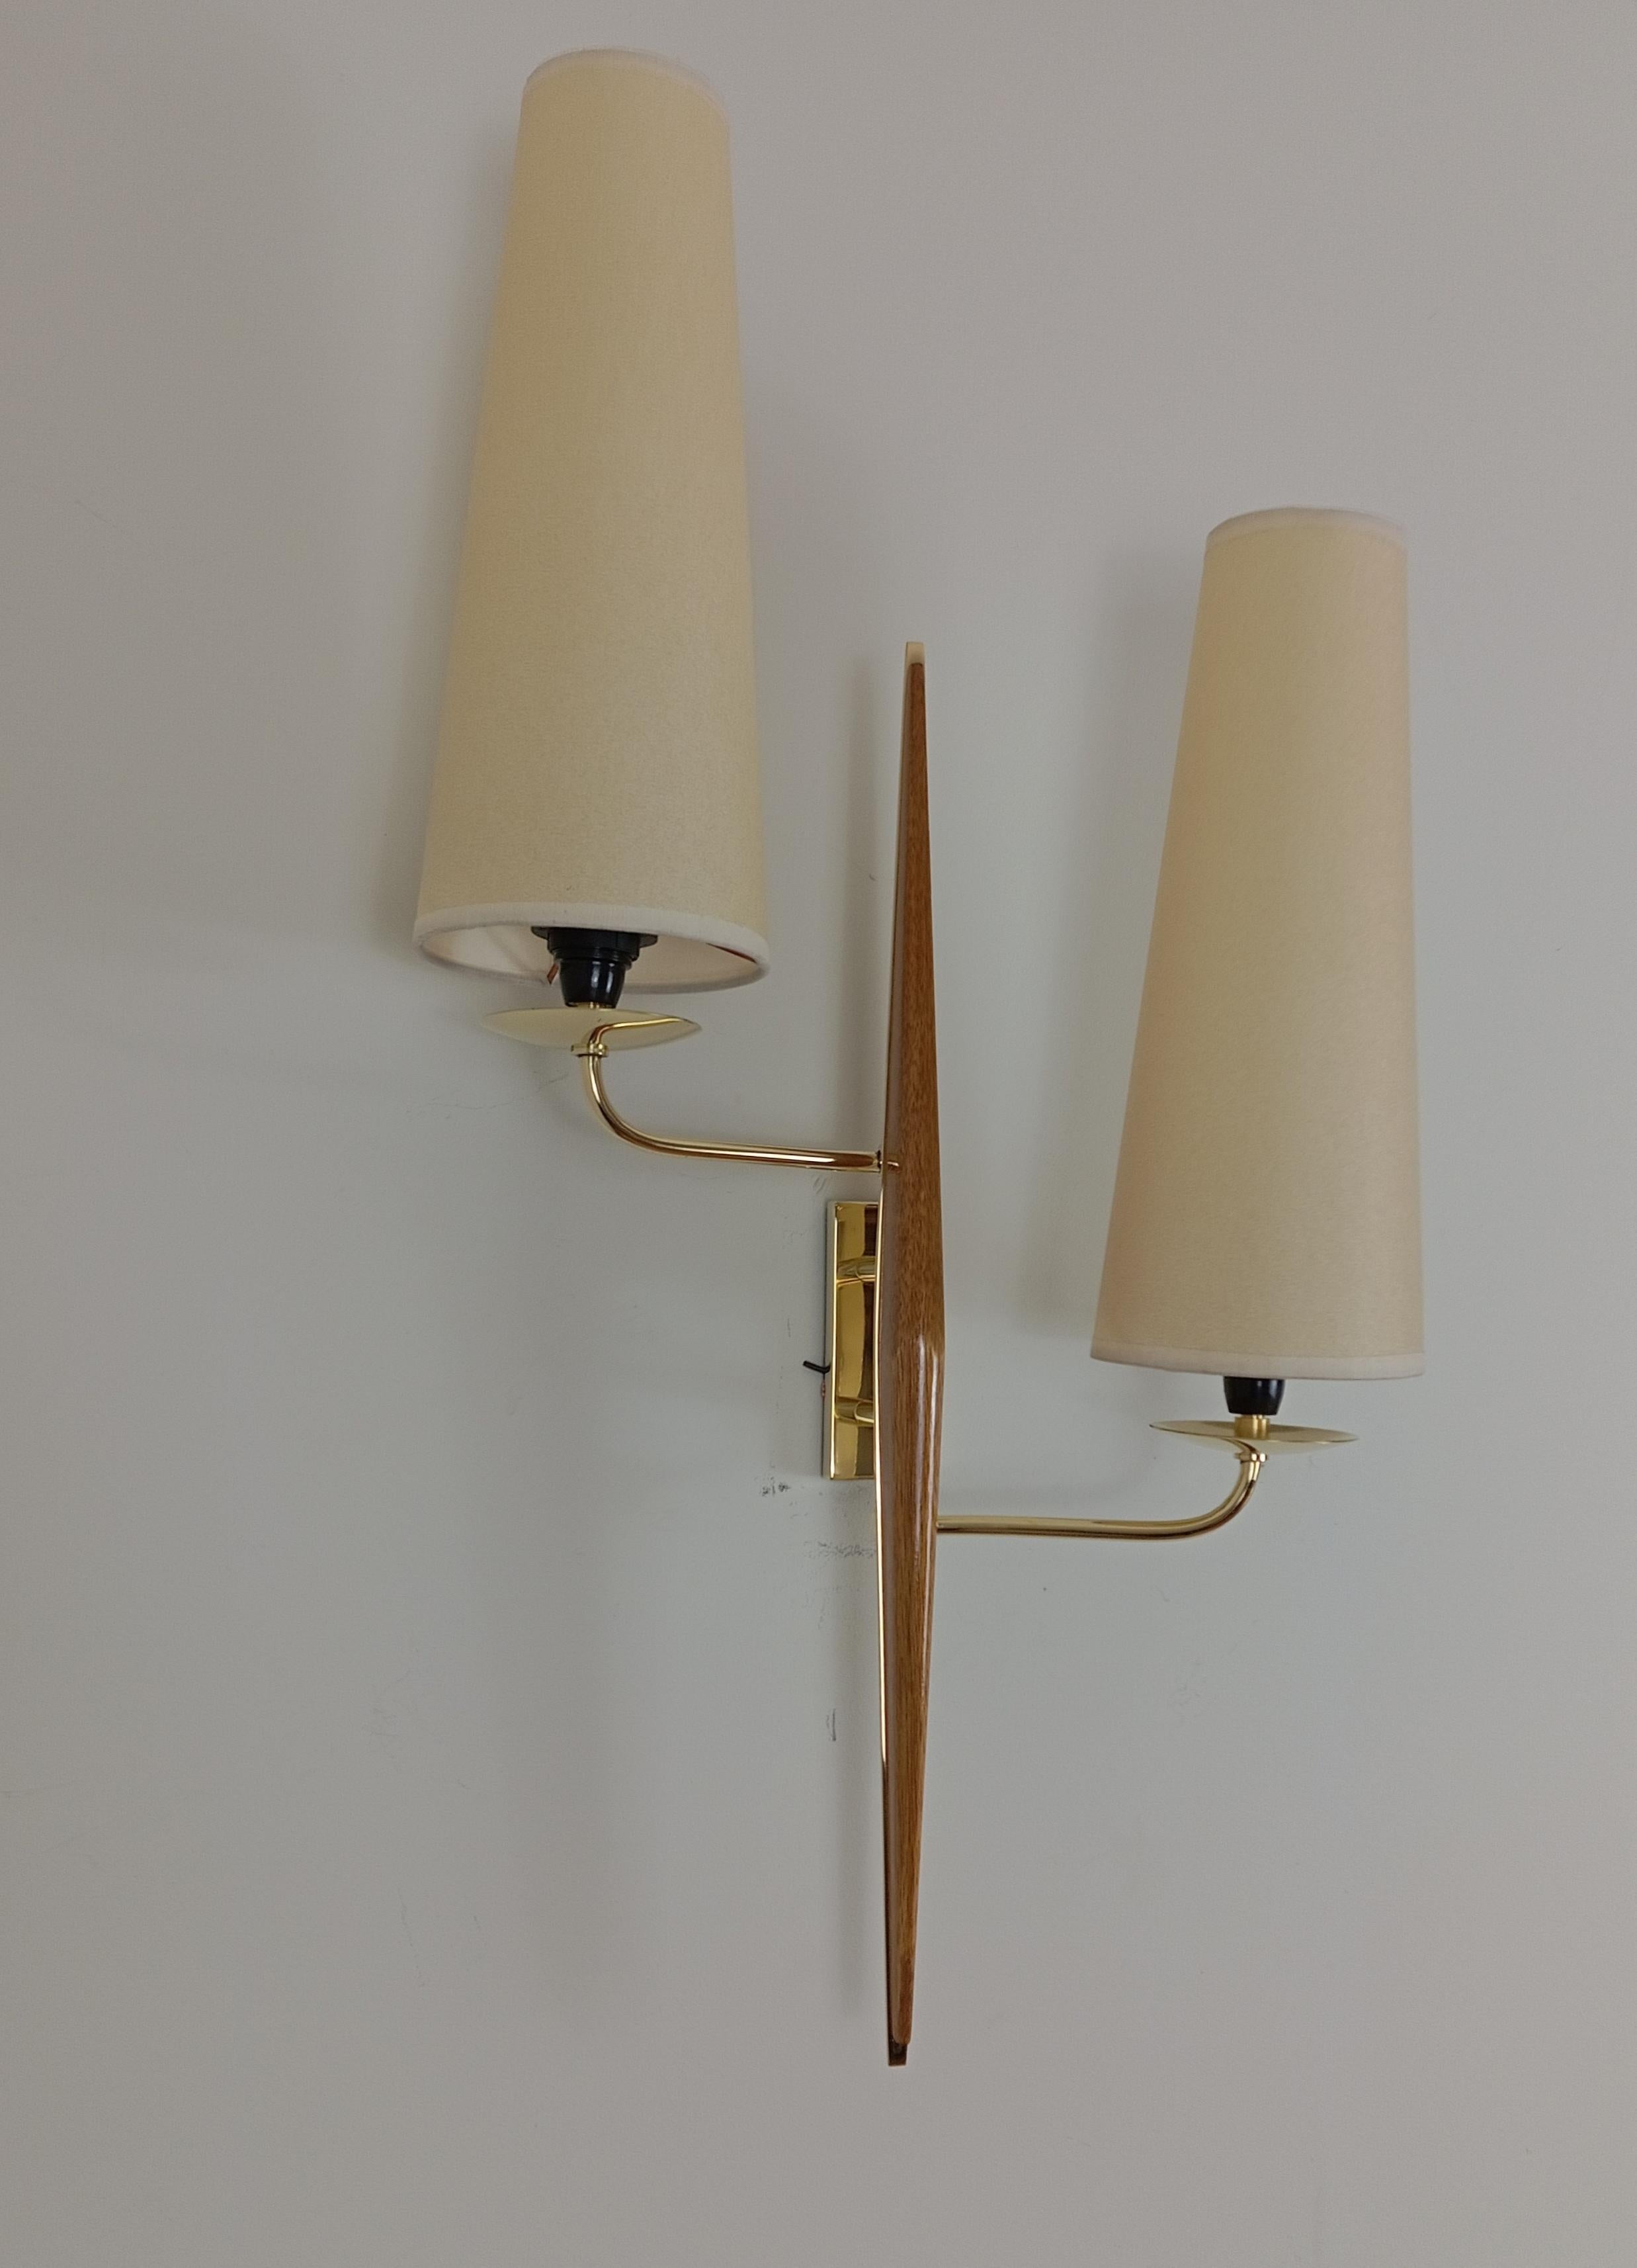 Pair of double wall lights in solid brass and varnished teak wood.
French work by Maison Lunel for Royal Lumière, circa 1950.
These sconces have been restored, new wiring to EU standards, lampshades redone to model, polished brass.
Perfect